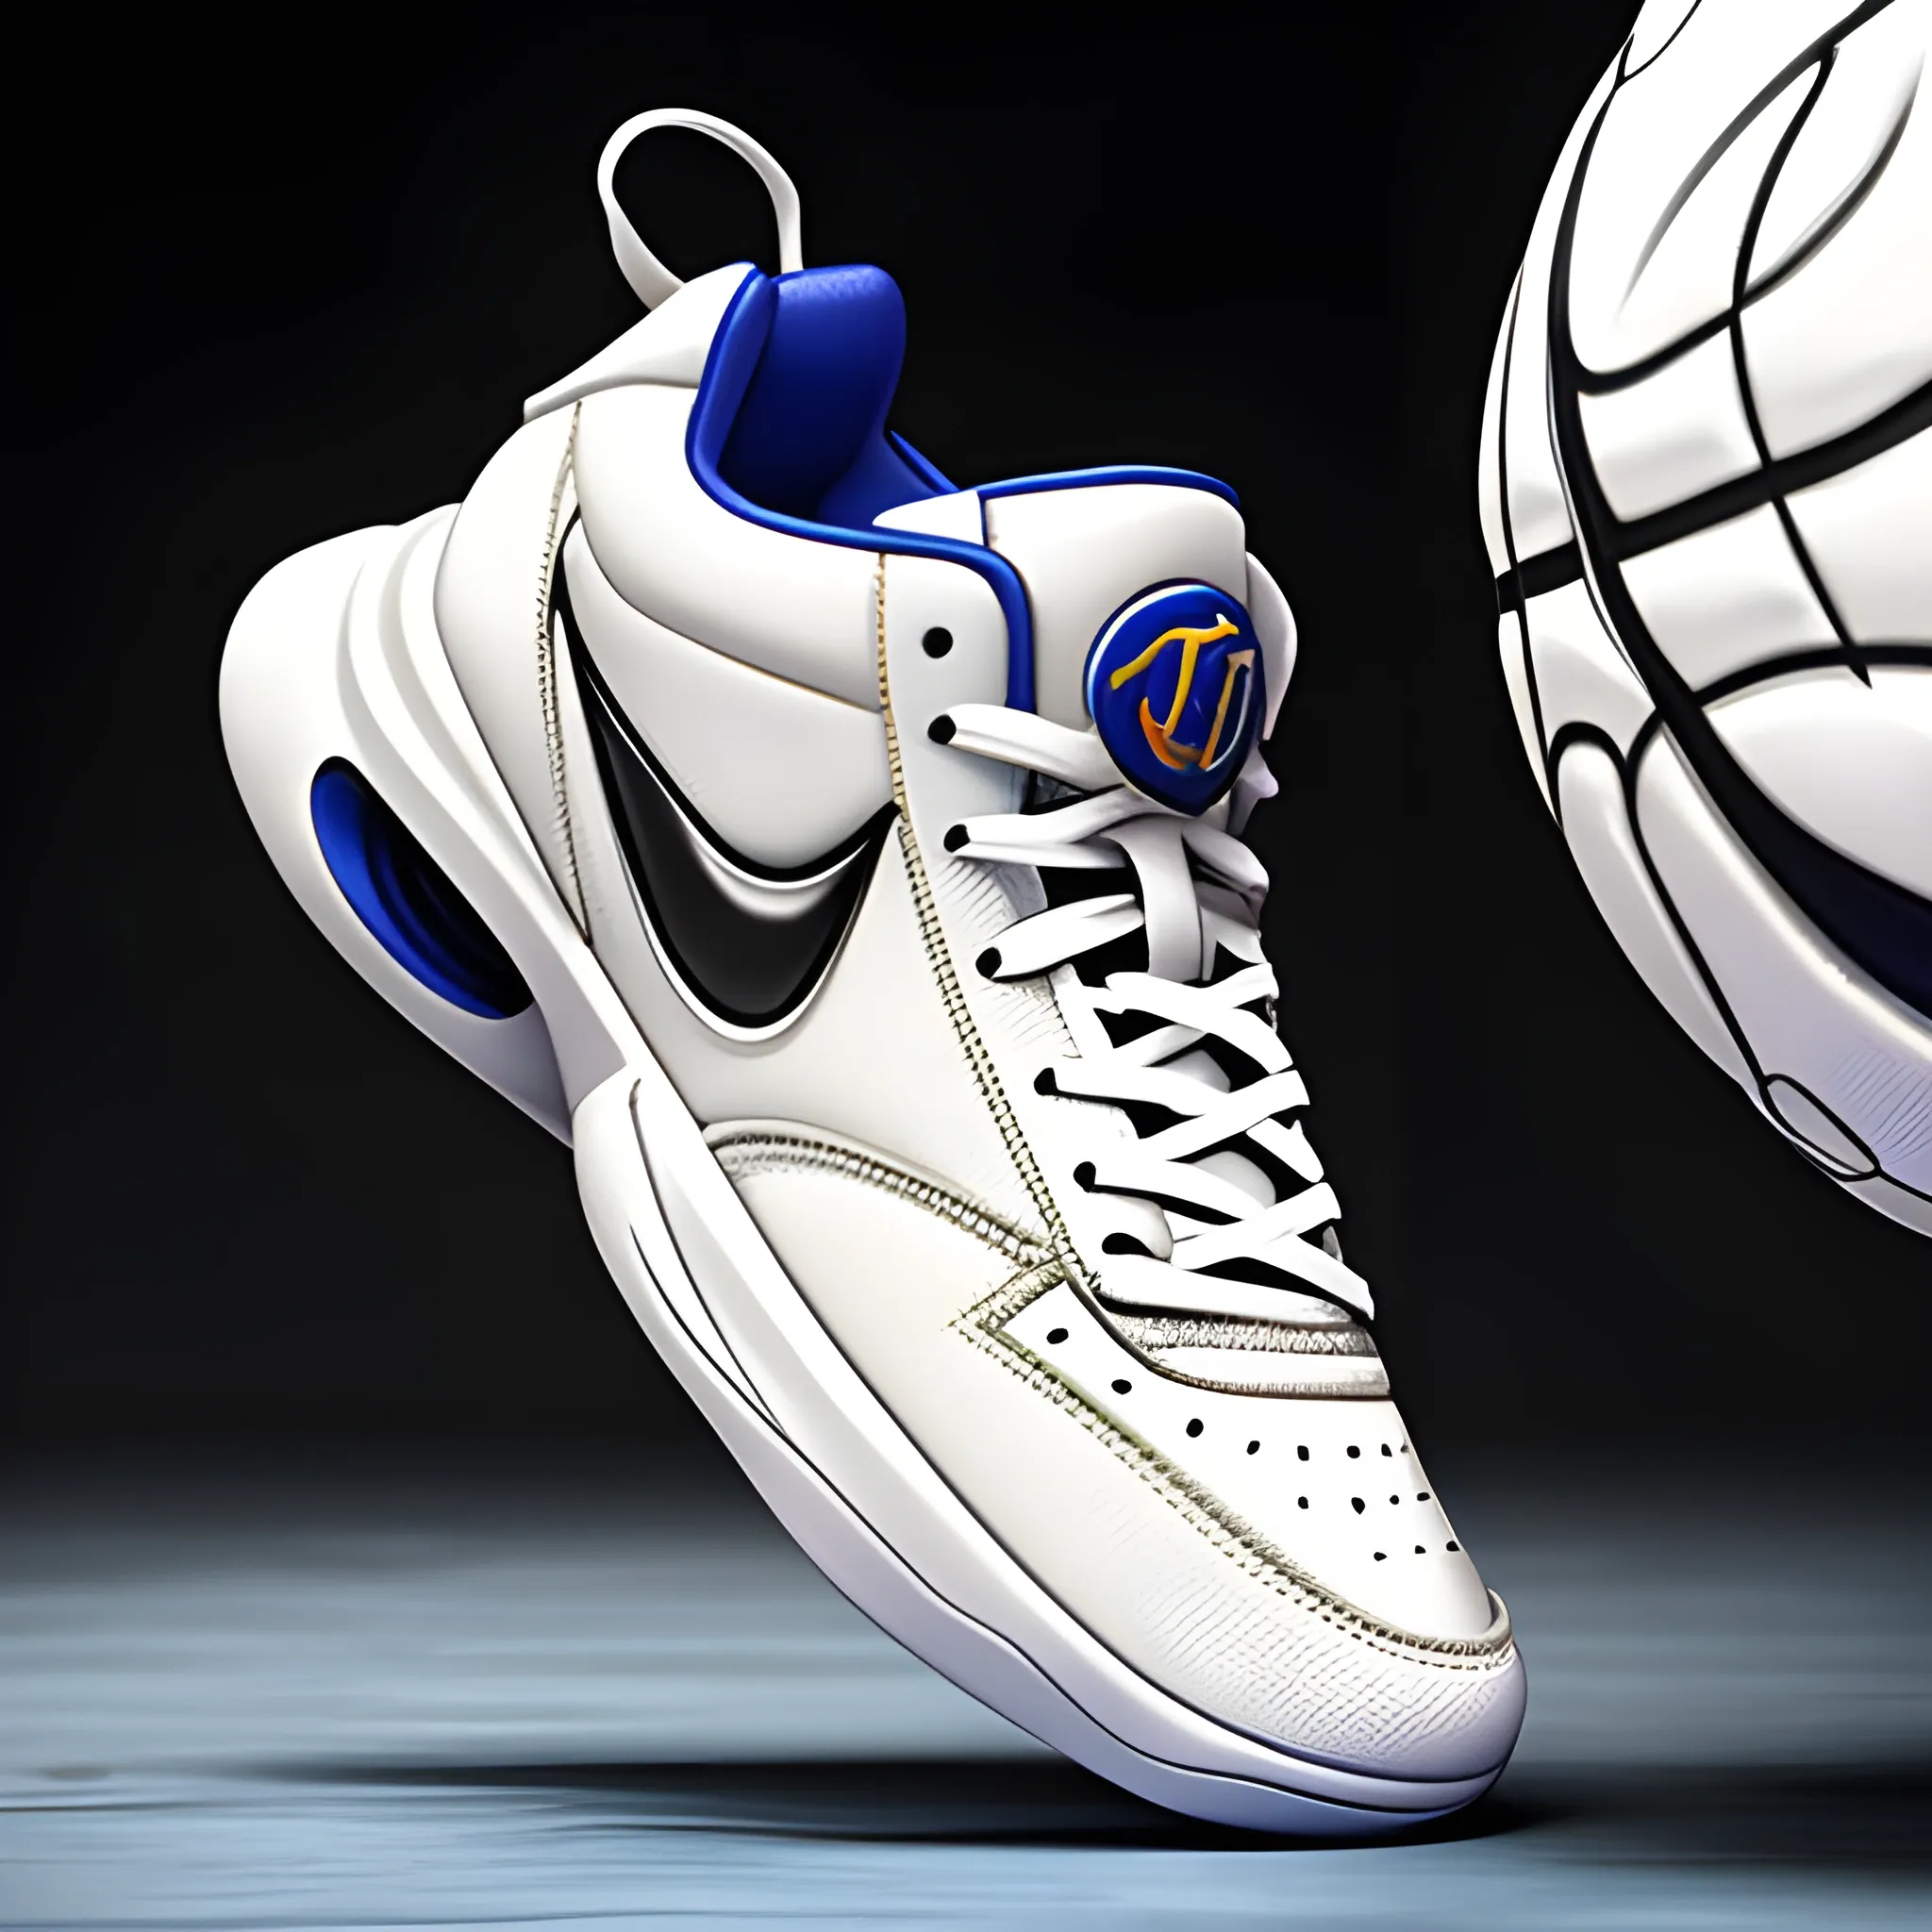 Concept Moon Knight basketball sneakers, popular in the art station, soft feel, bloated, excluding nike style, smooth, sharp focus
